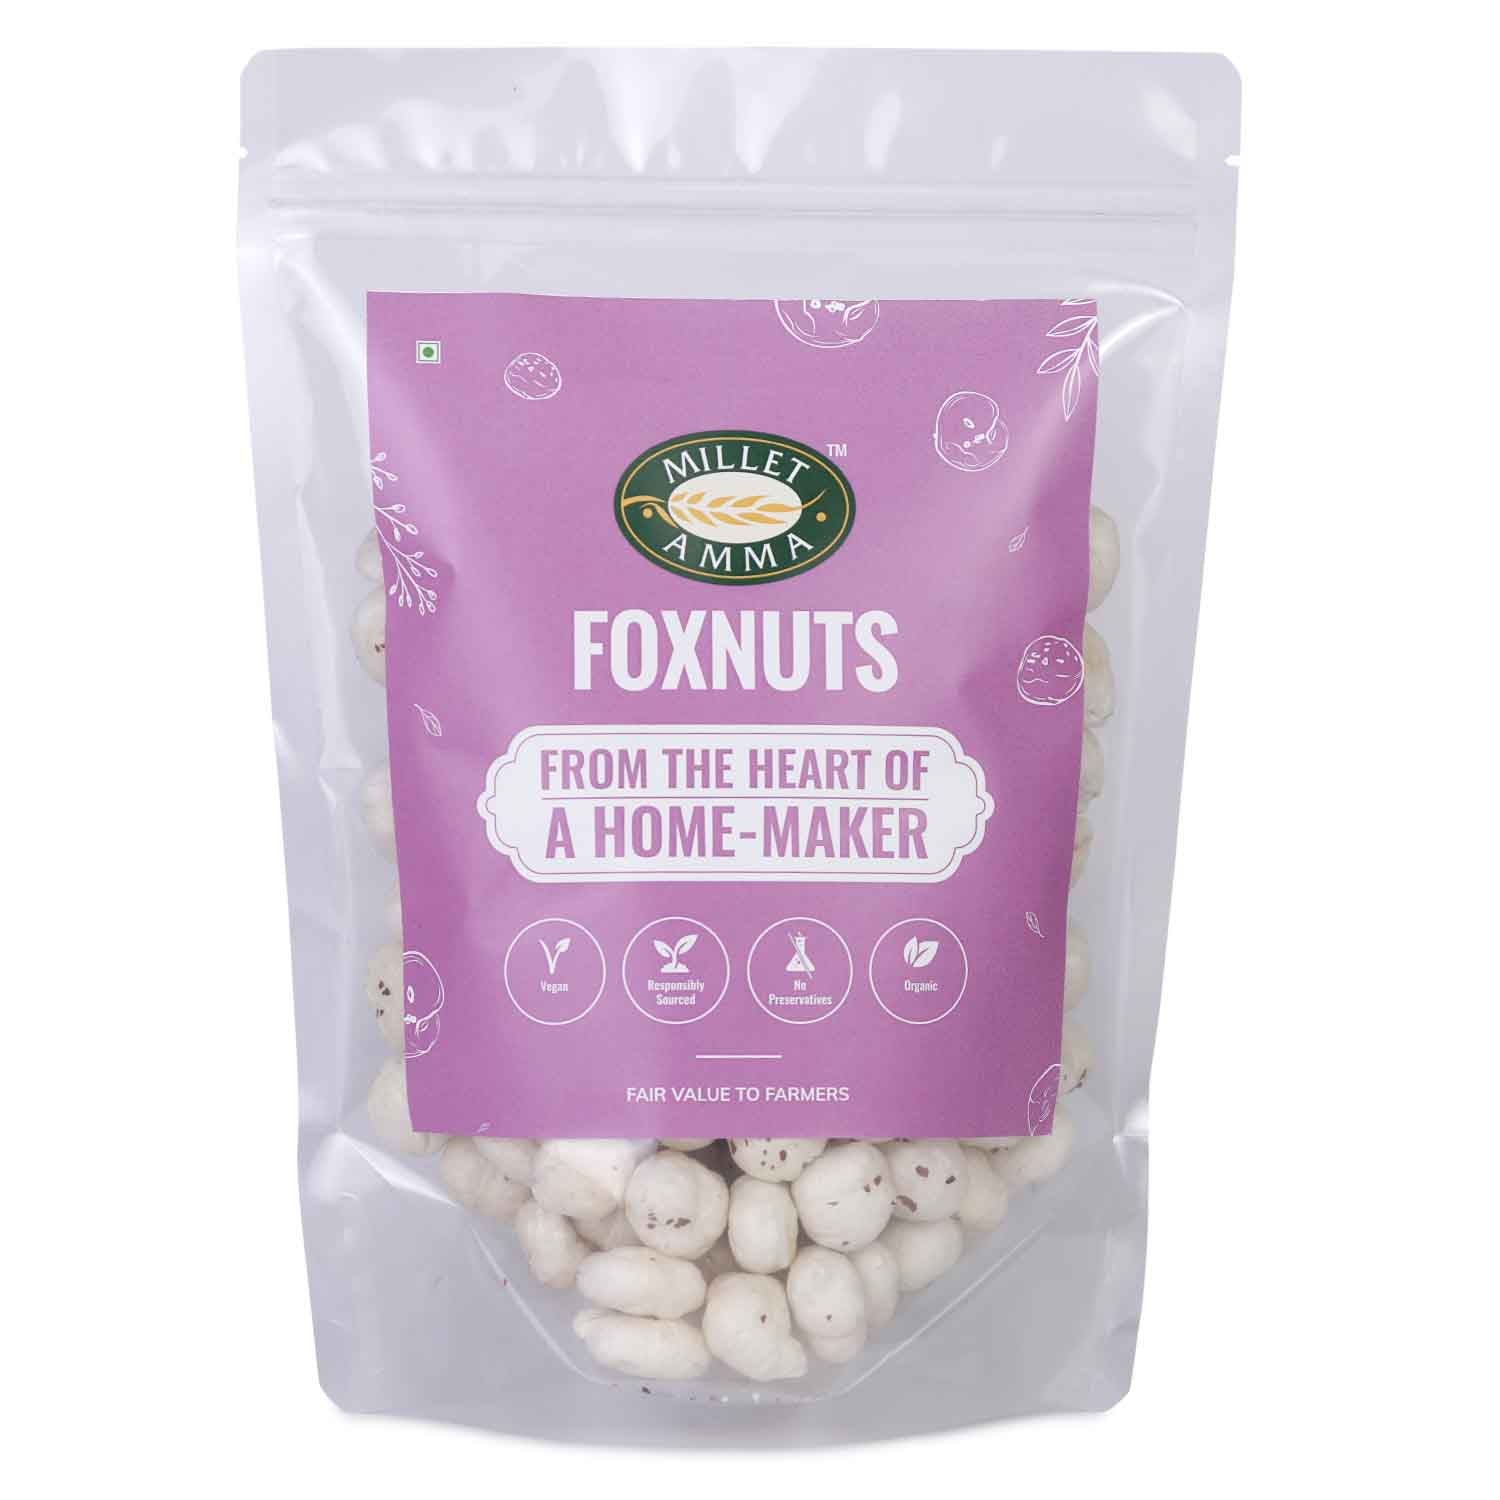 Millet Amma’s Organic Fox Nuts- Millet Amma’s Organic Fox Nuts also known as lotus seeds are rich in Magnesium and fiber.  Fox Nuts are an excellent source of several important nutrients that make it a good addition for a balanced and healthy diet.